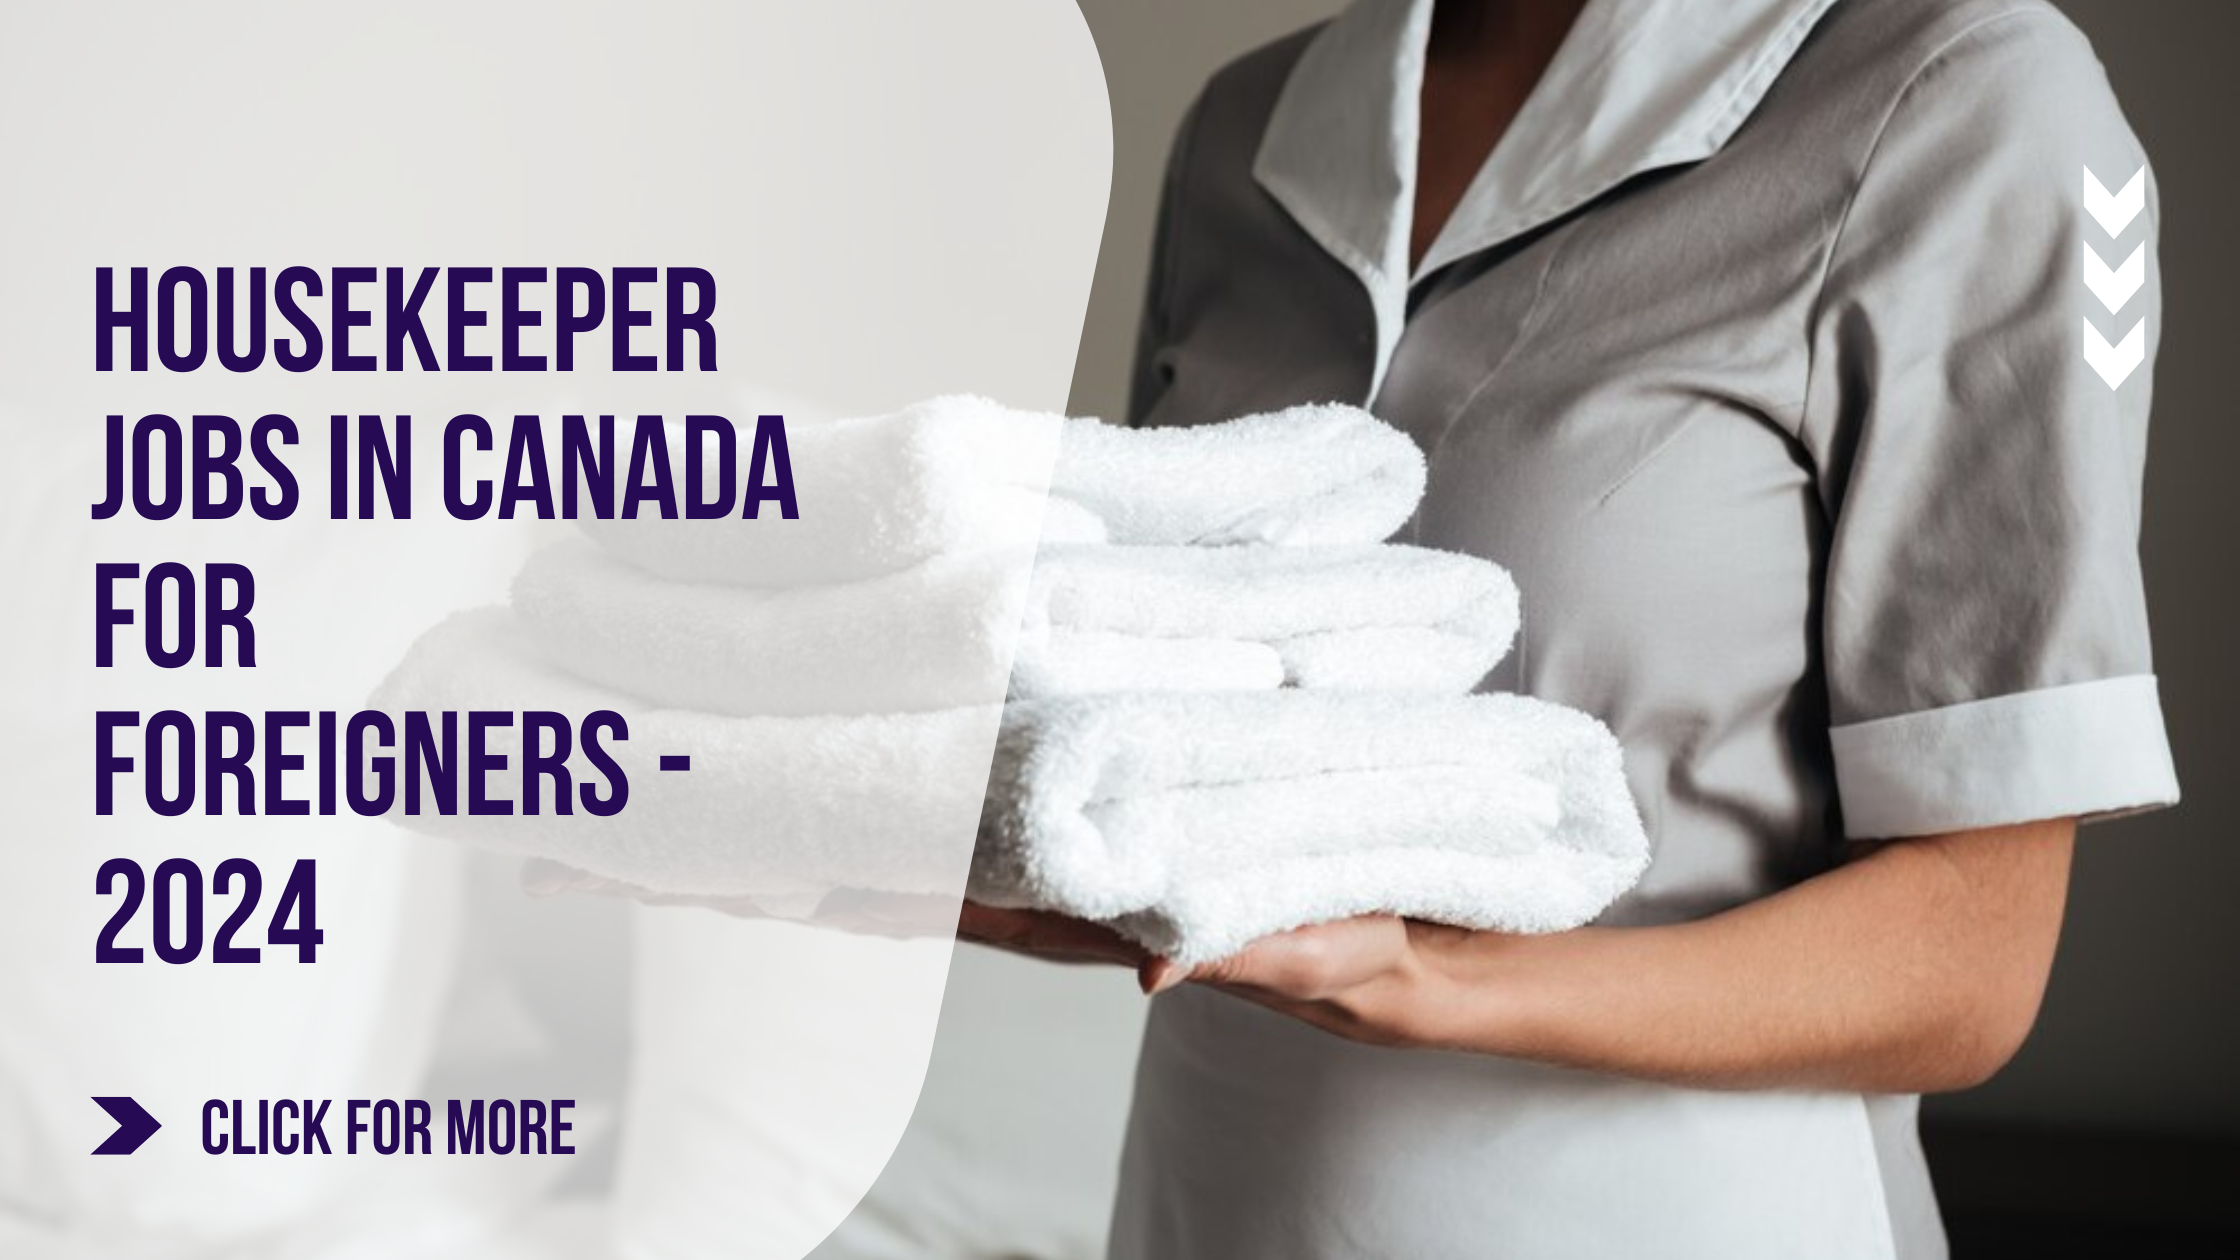 Housekeeper Jobs in Canada for Foreigners - 2024